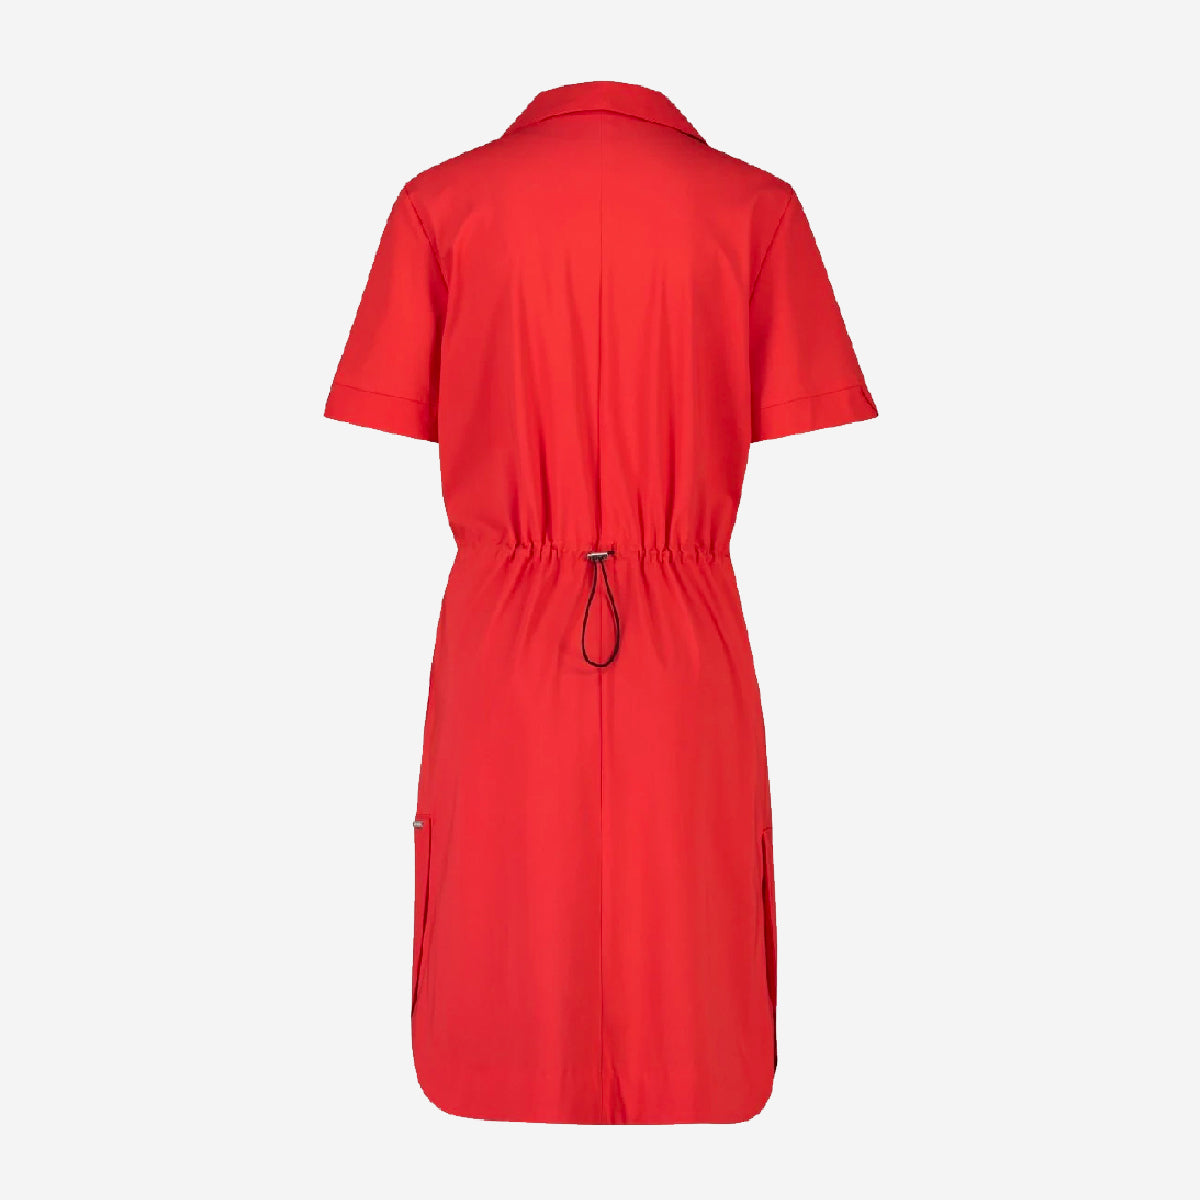 DRESS LUCIA/1 RED